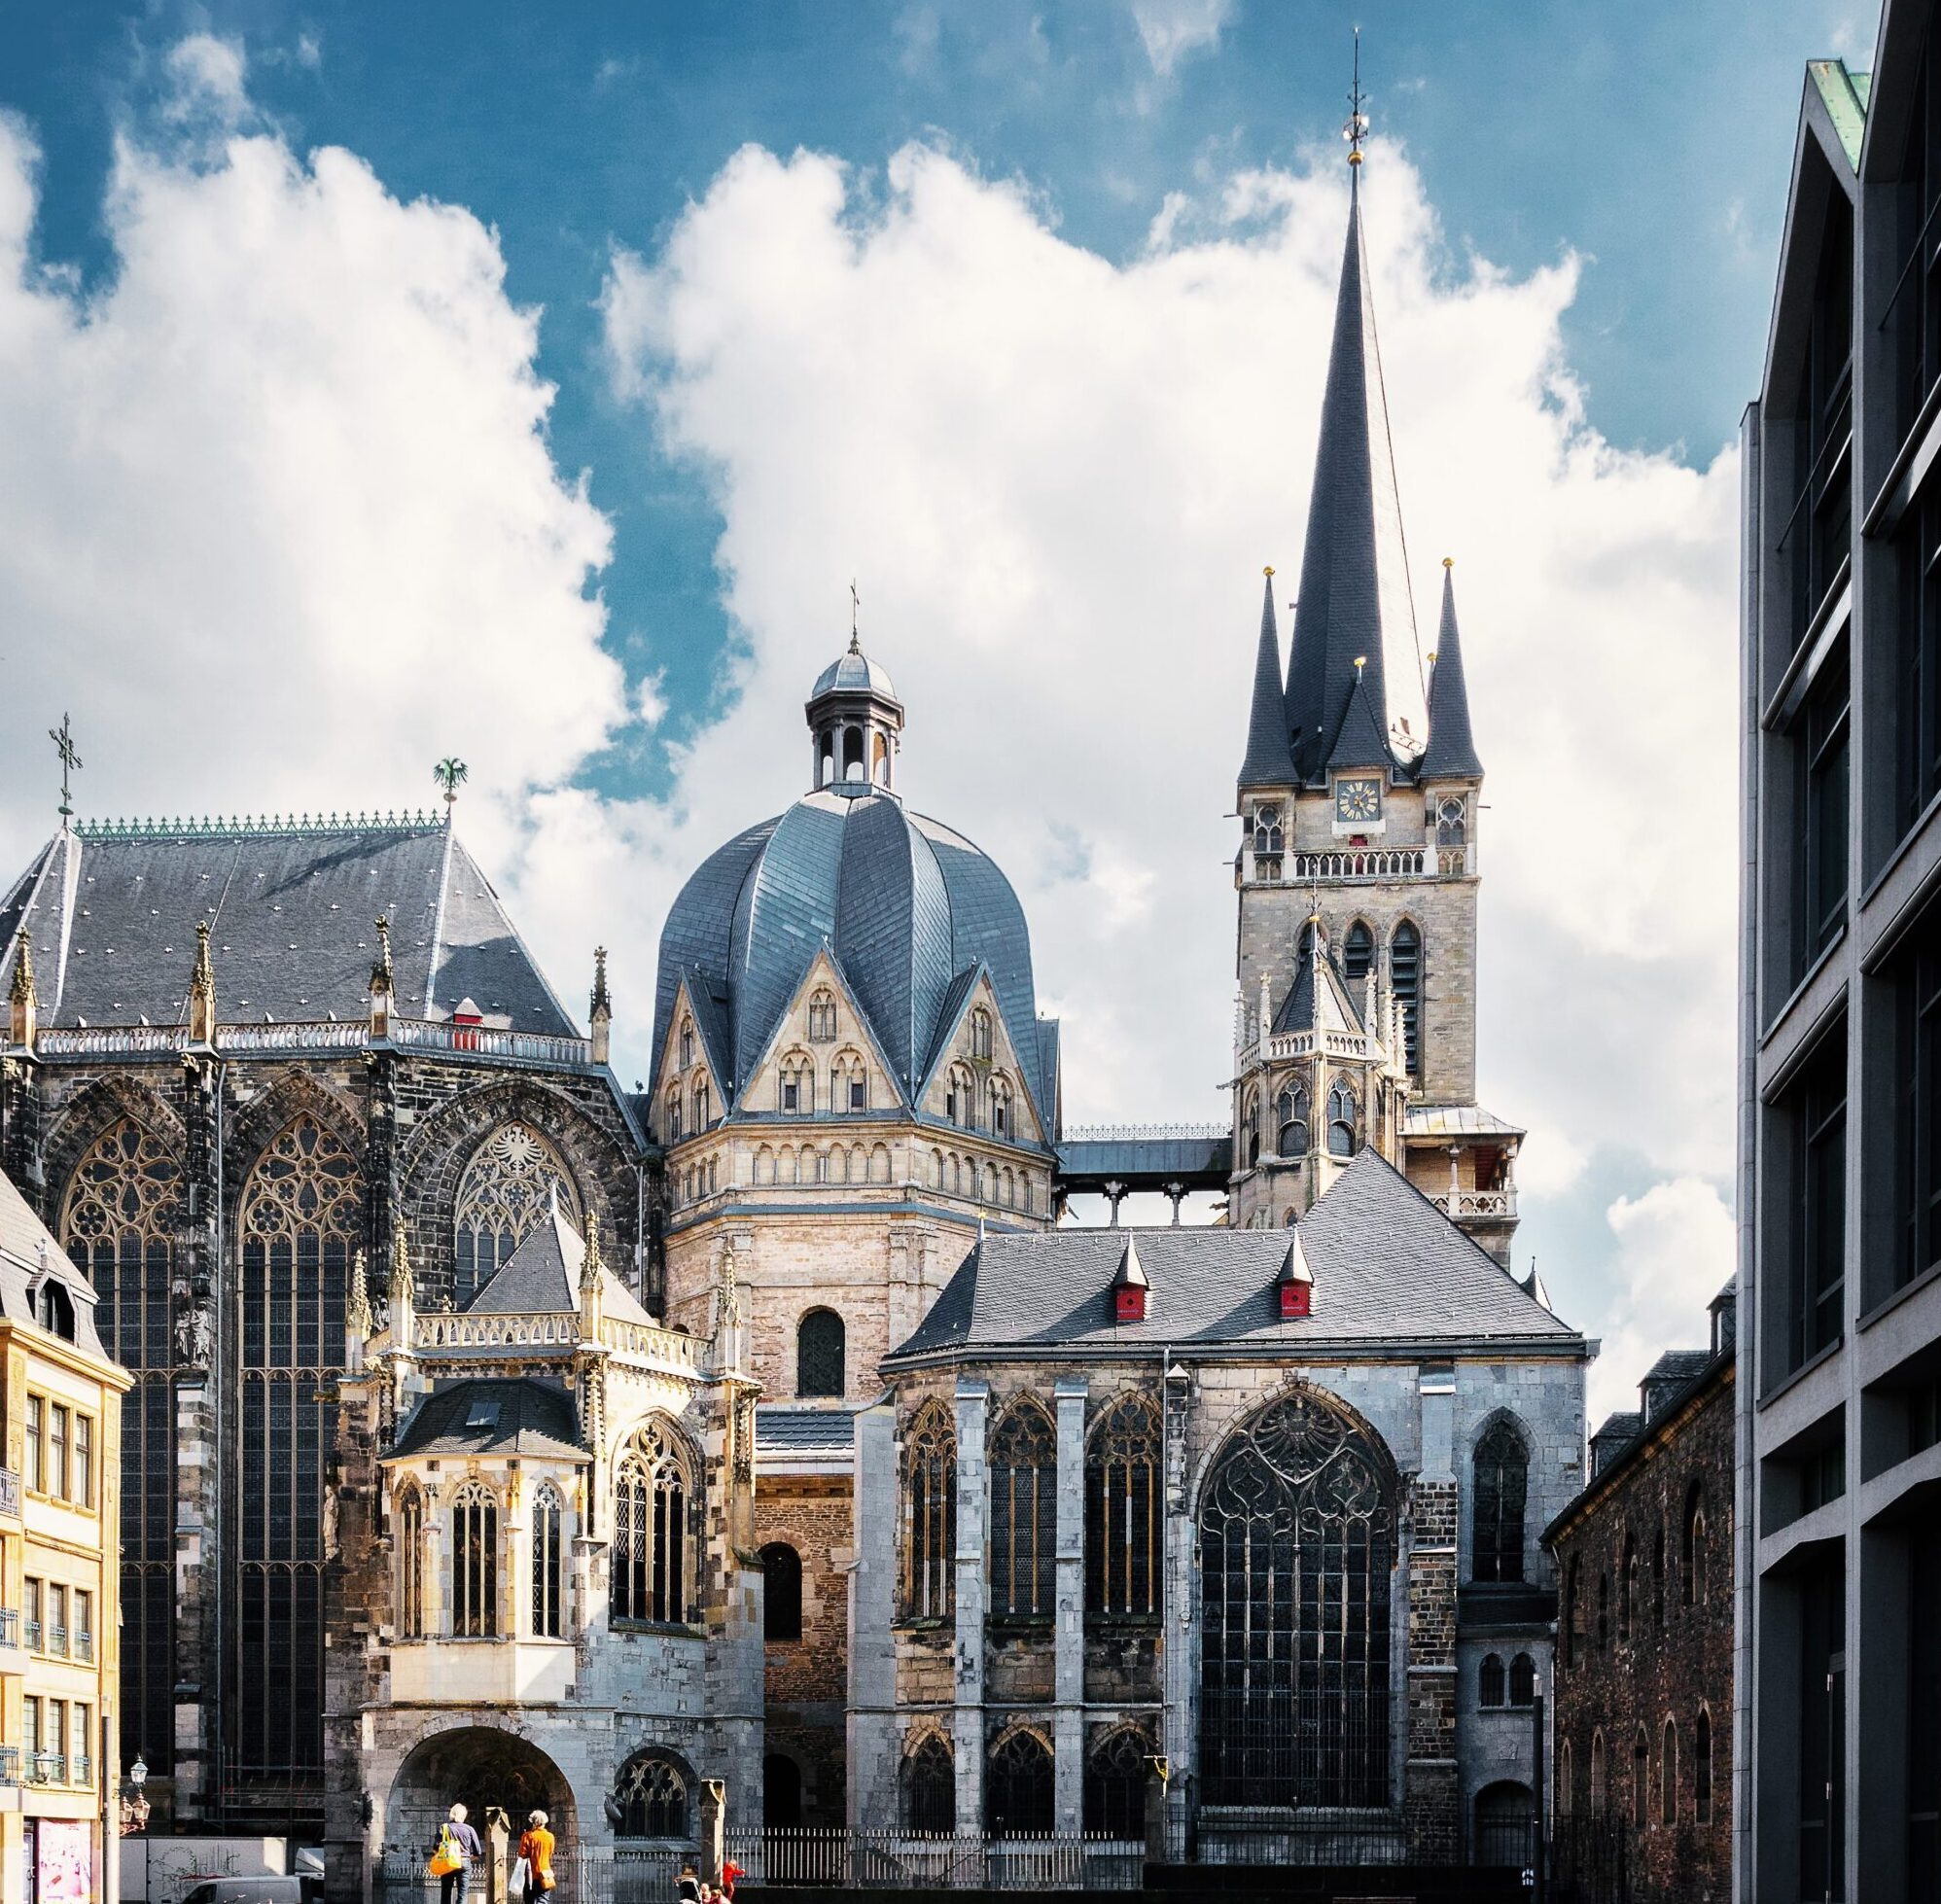 All that you needed to know about Aachen